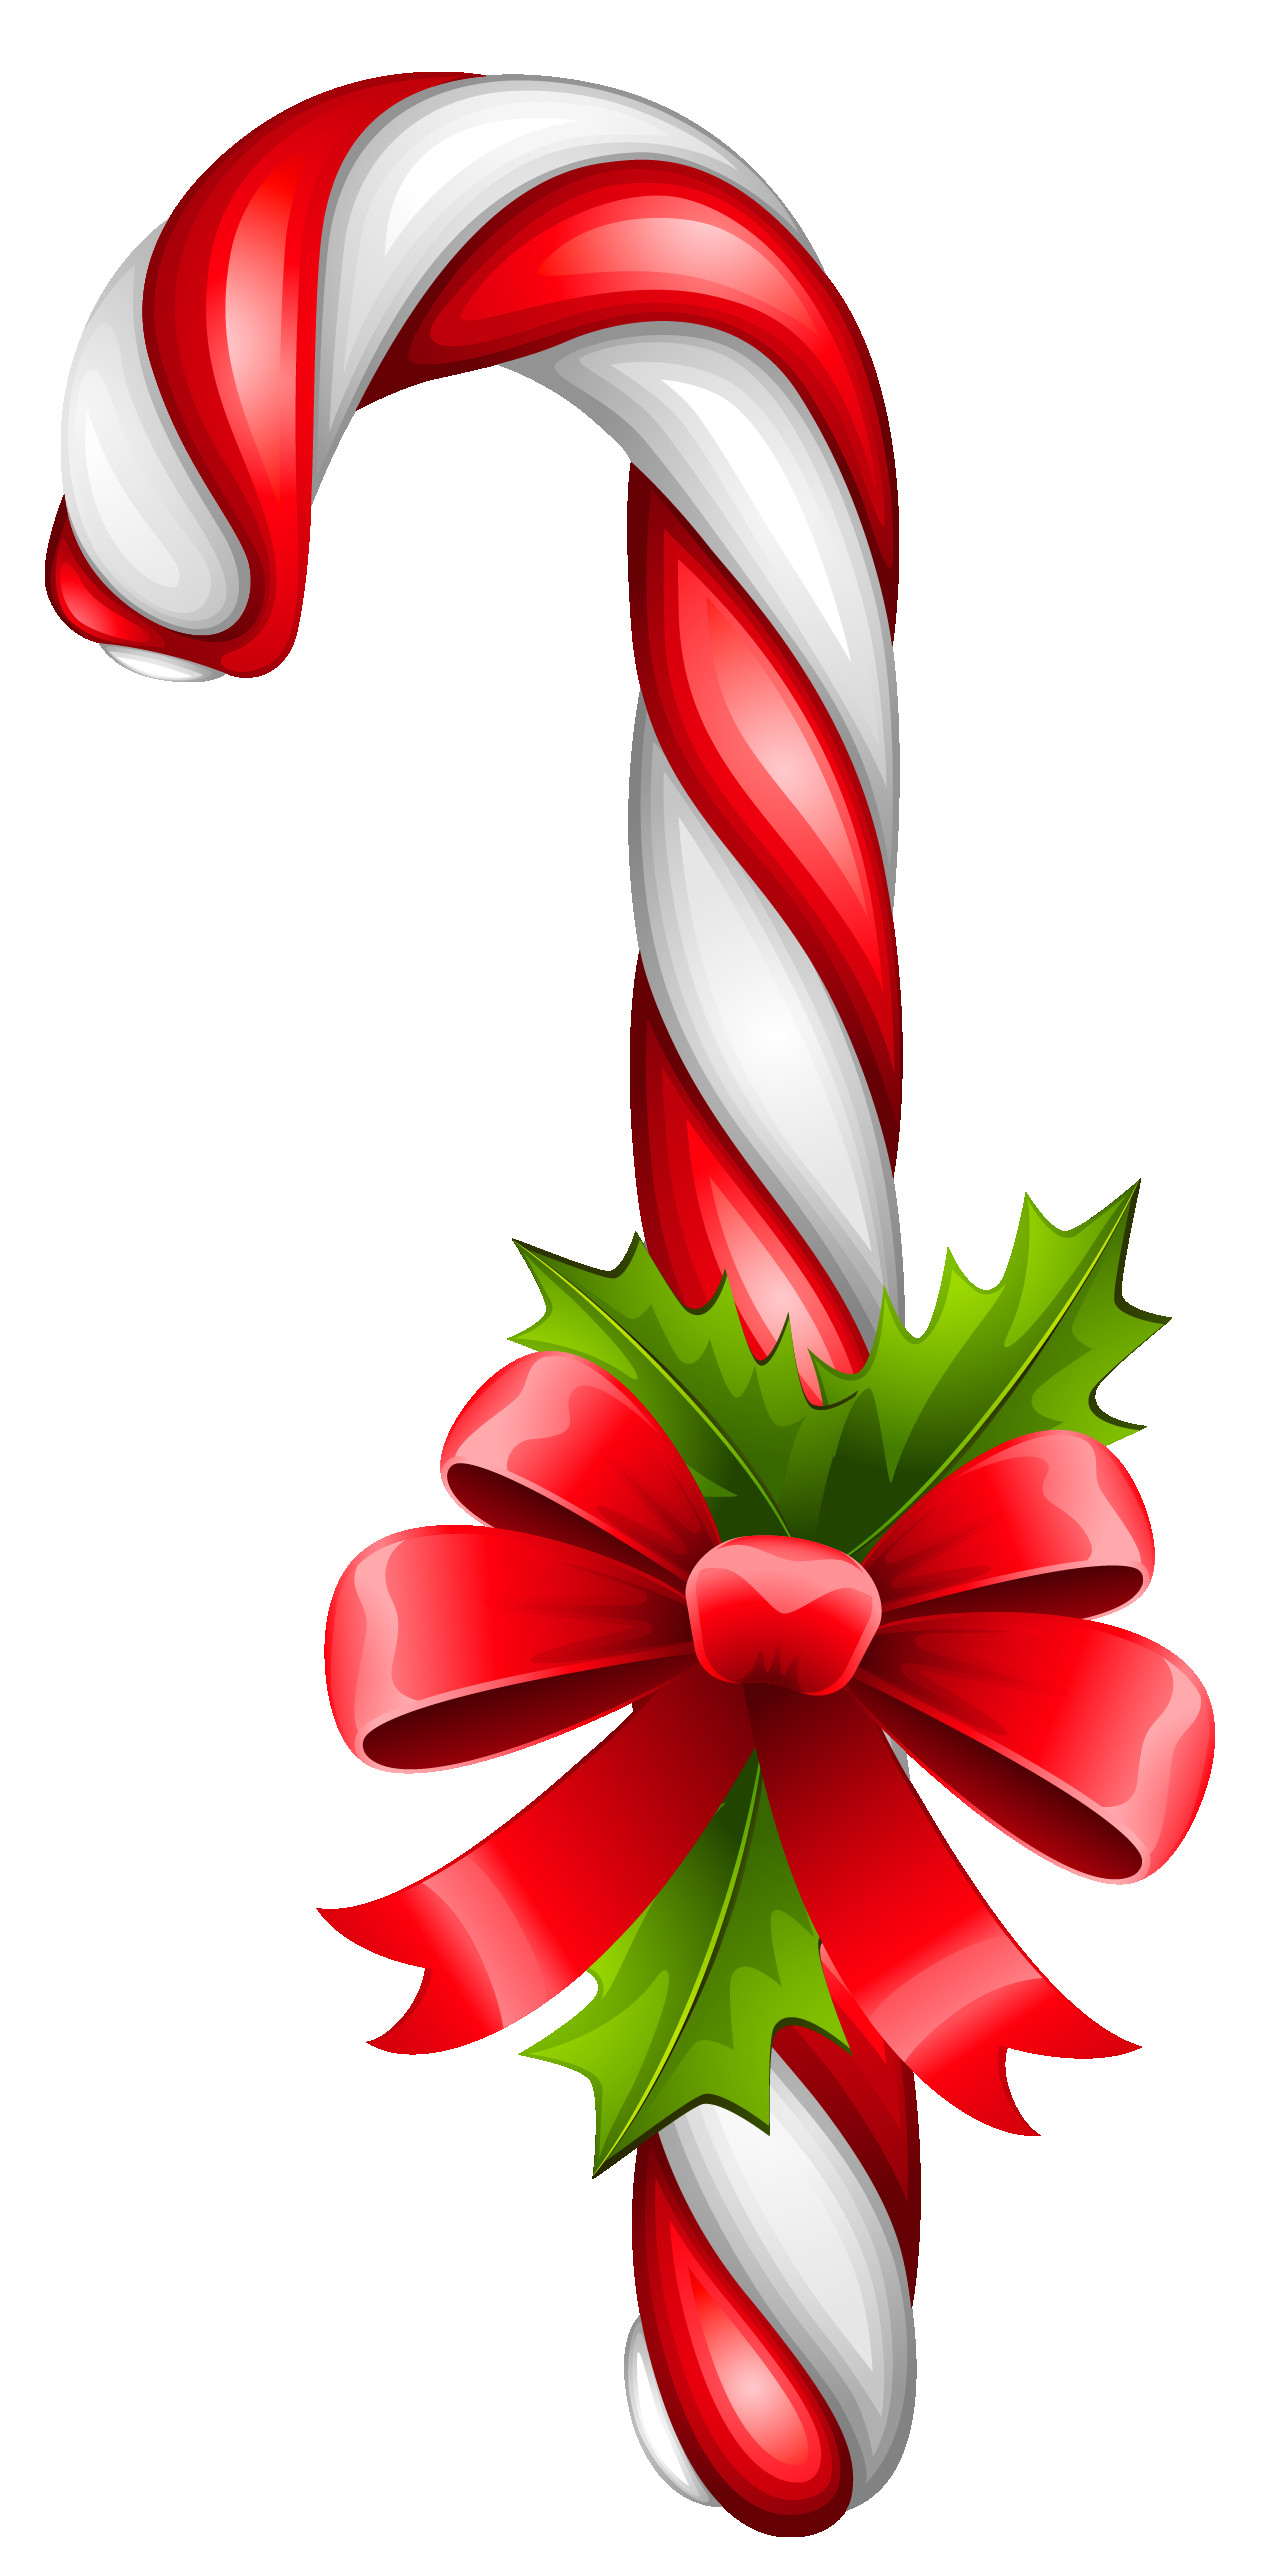 Christmas Candy Image
 Candy cane christmas clip art free clip art images free